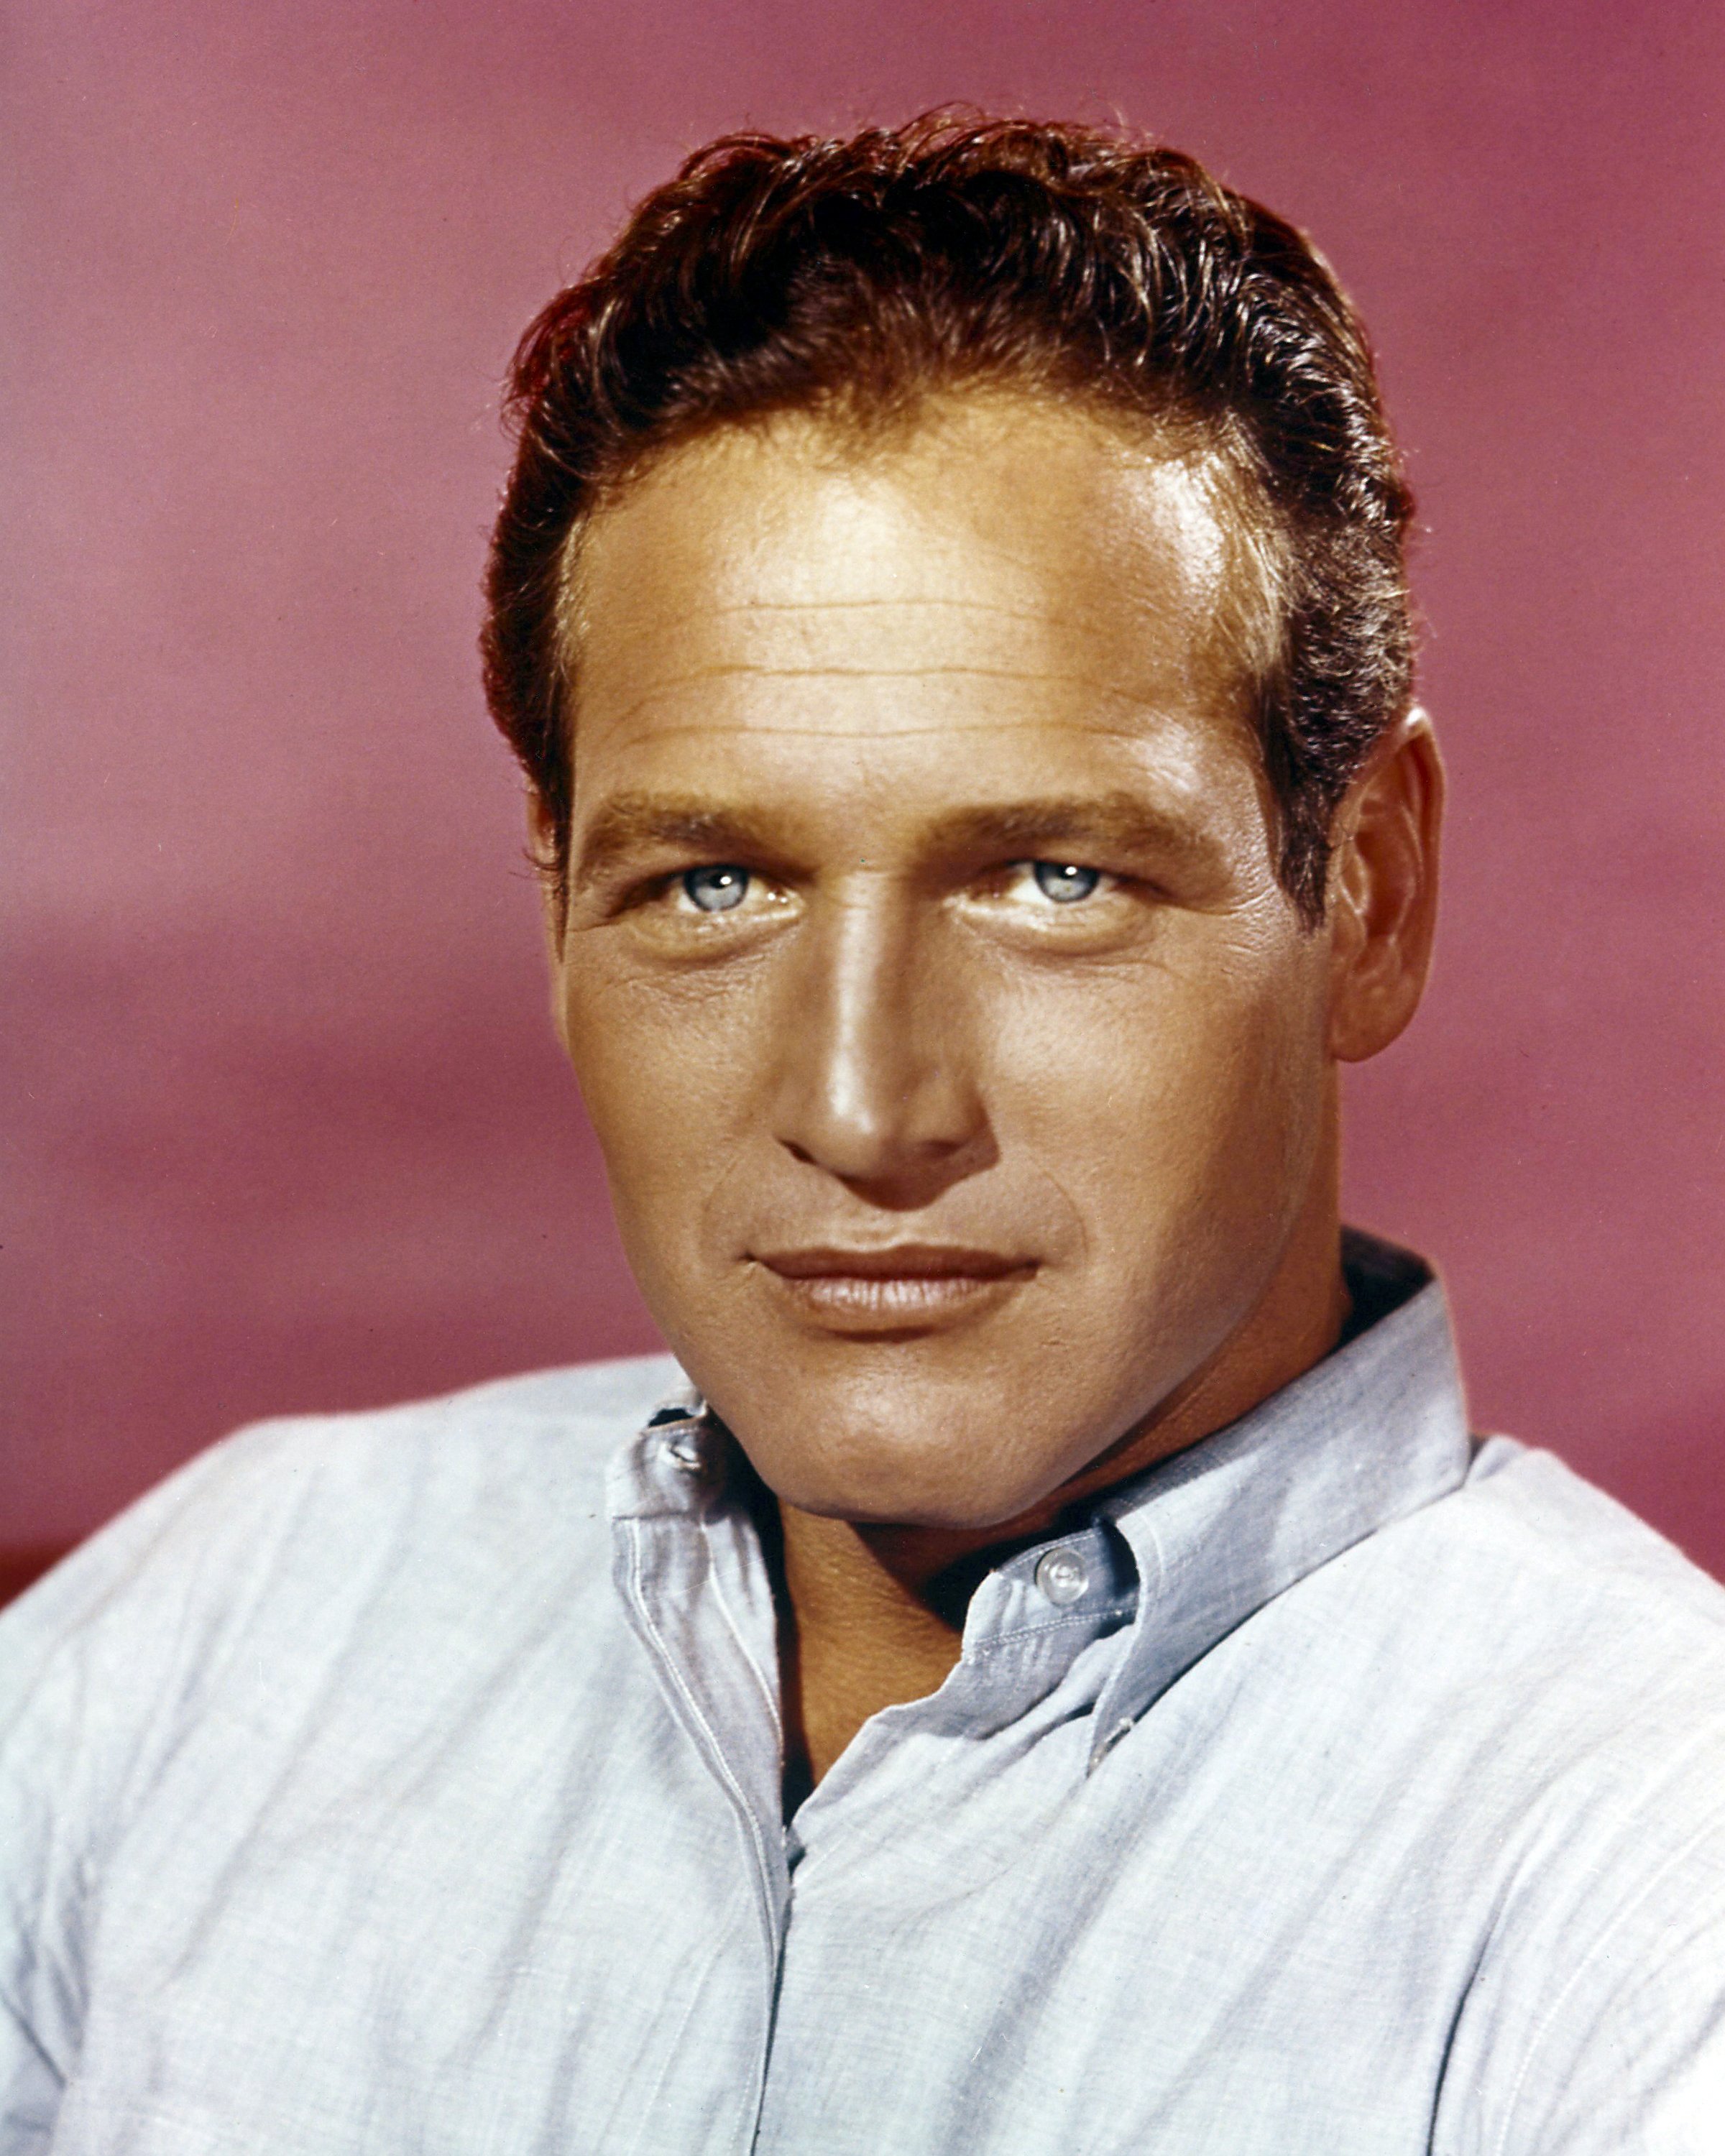 Portrait of Paul Newman from the 1960s. | Photo: Getty Images